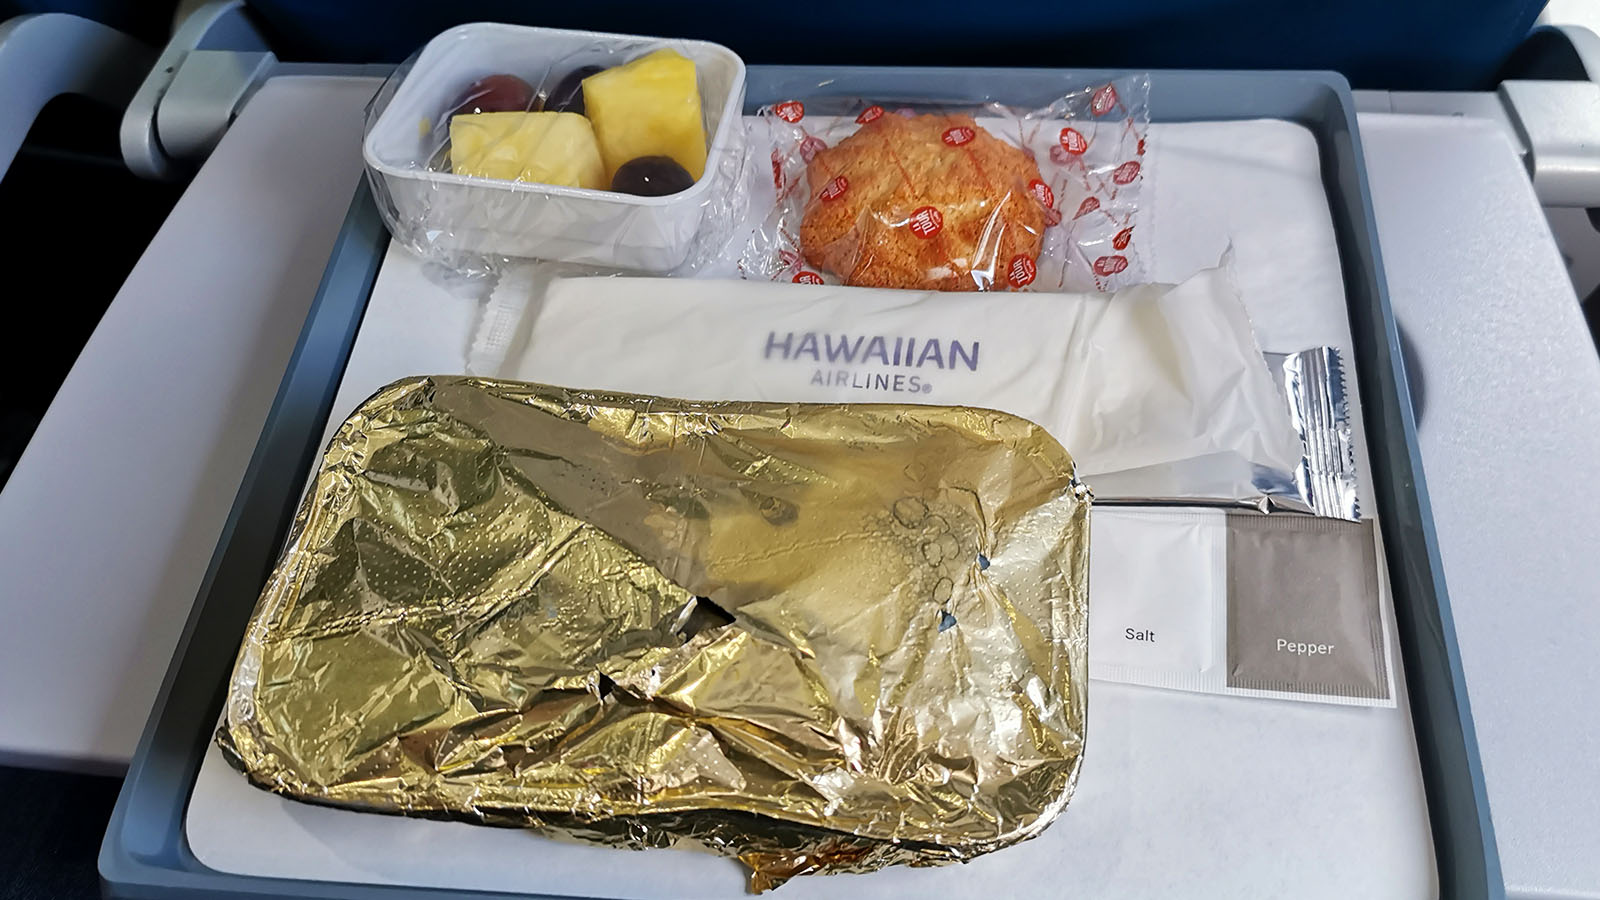 Hot meal served on Hawaiian Airlines in Economy